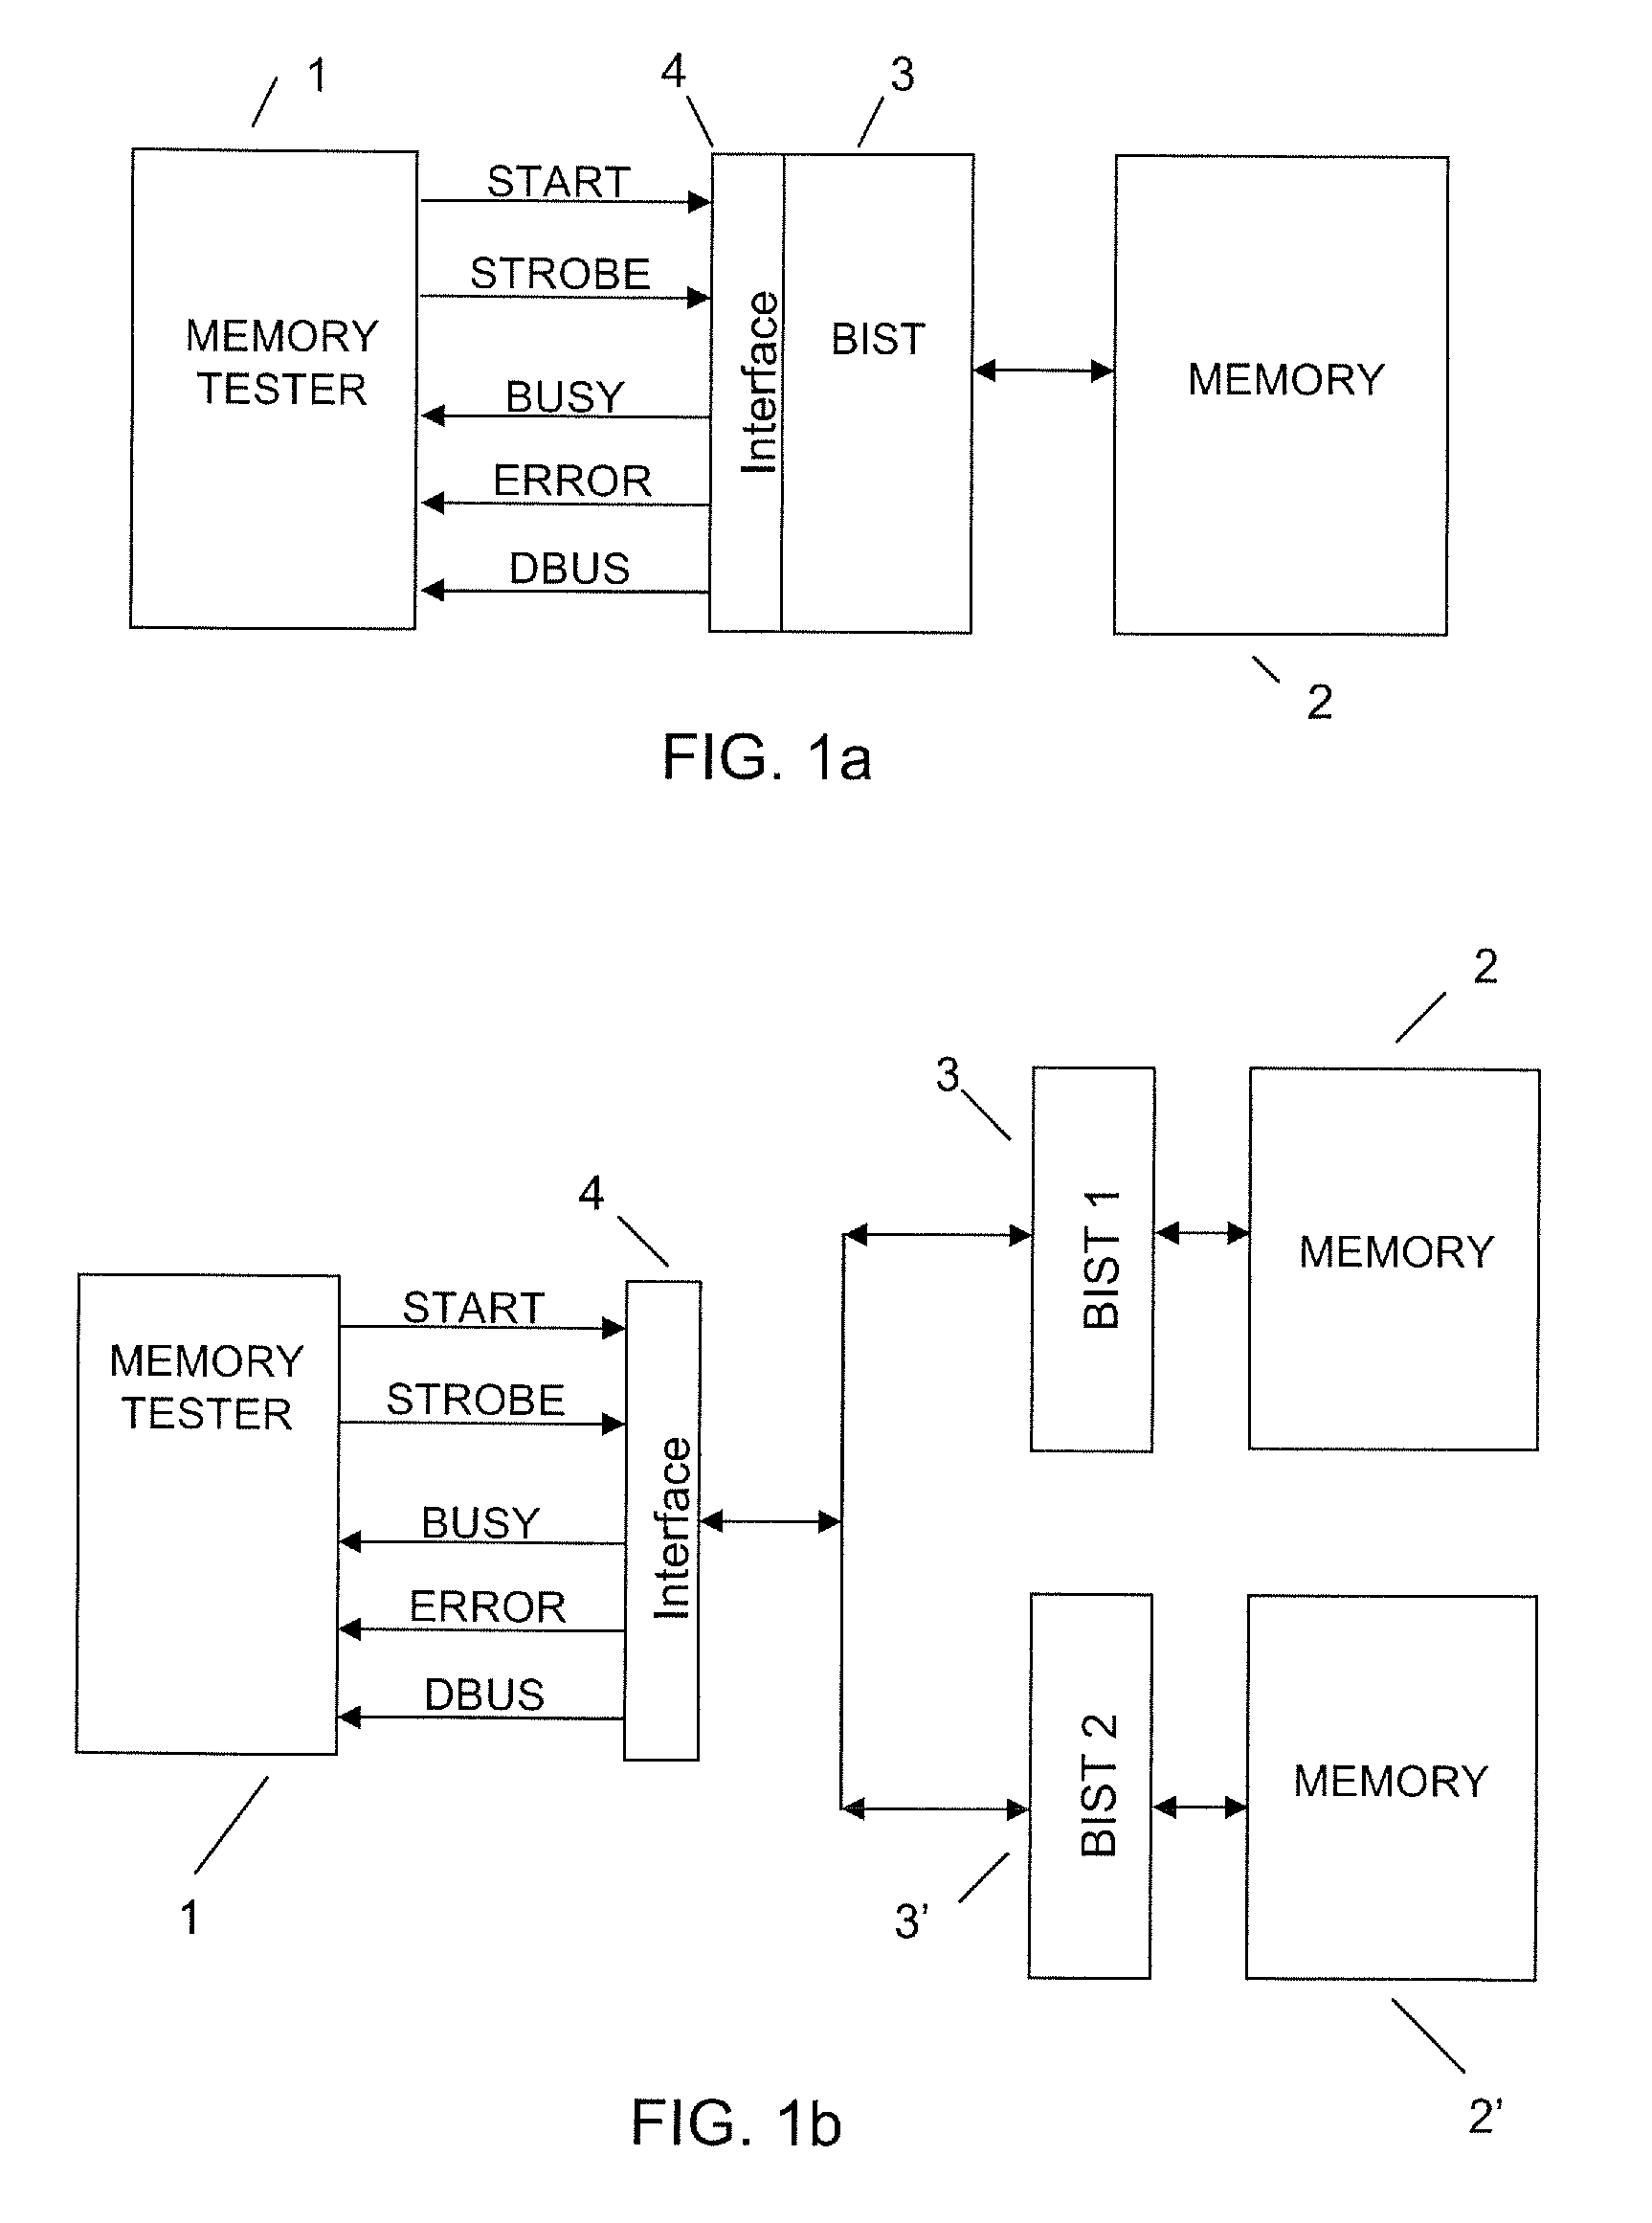 Method and system for memory testing and test data reporting during memory testing